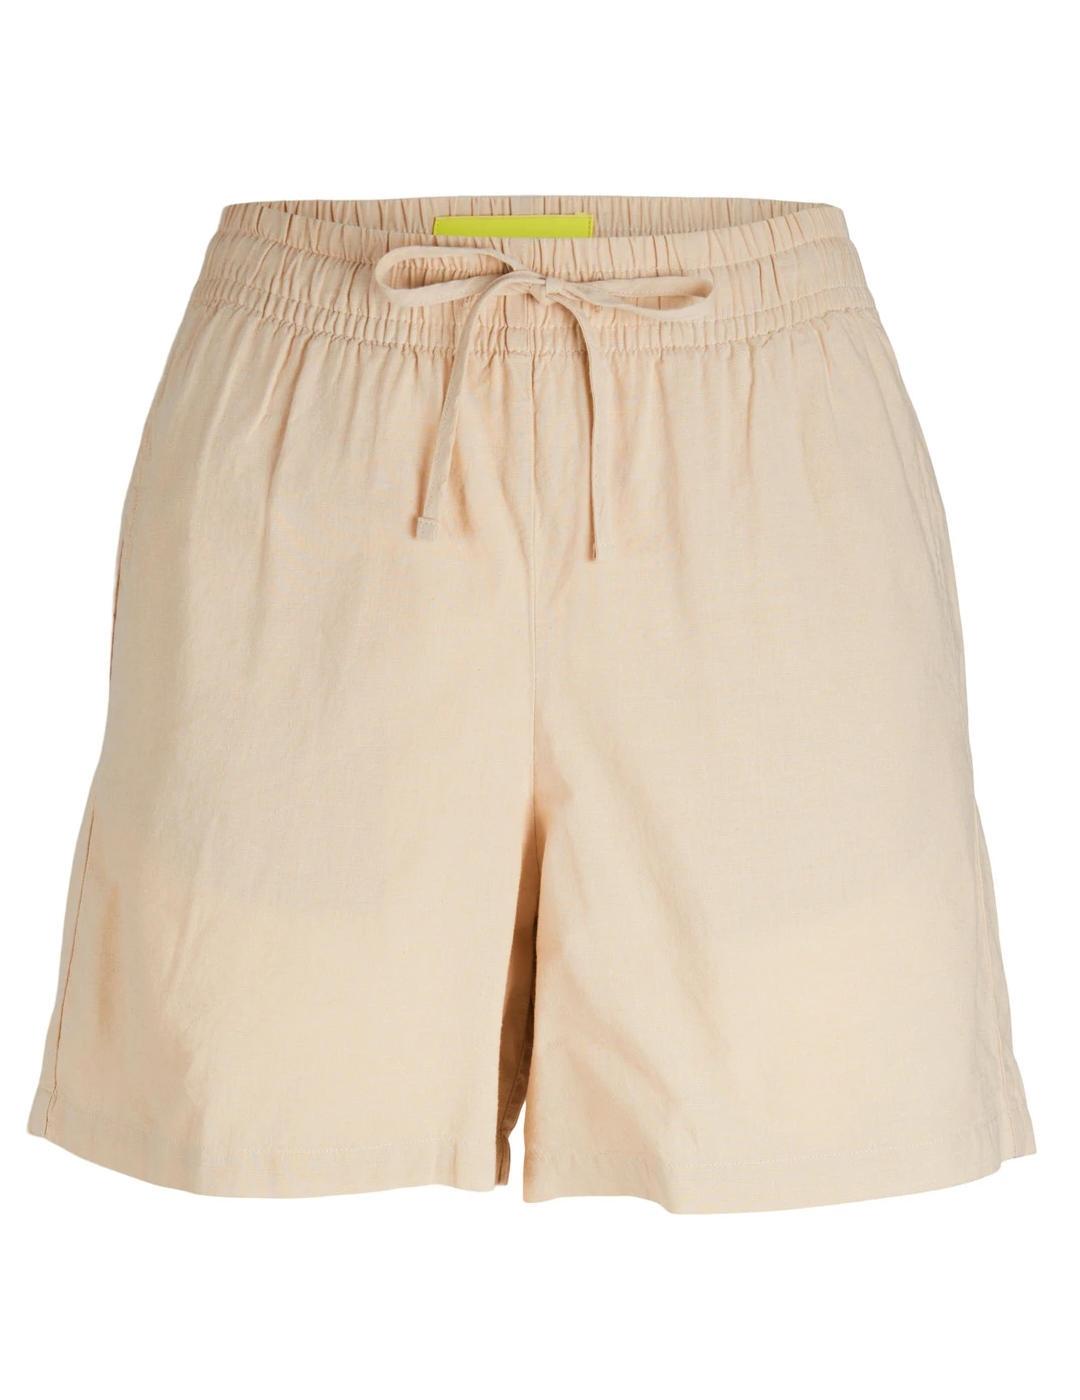 Short JJXX Amy beige lino relaxed para mujer